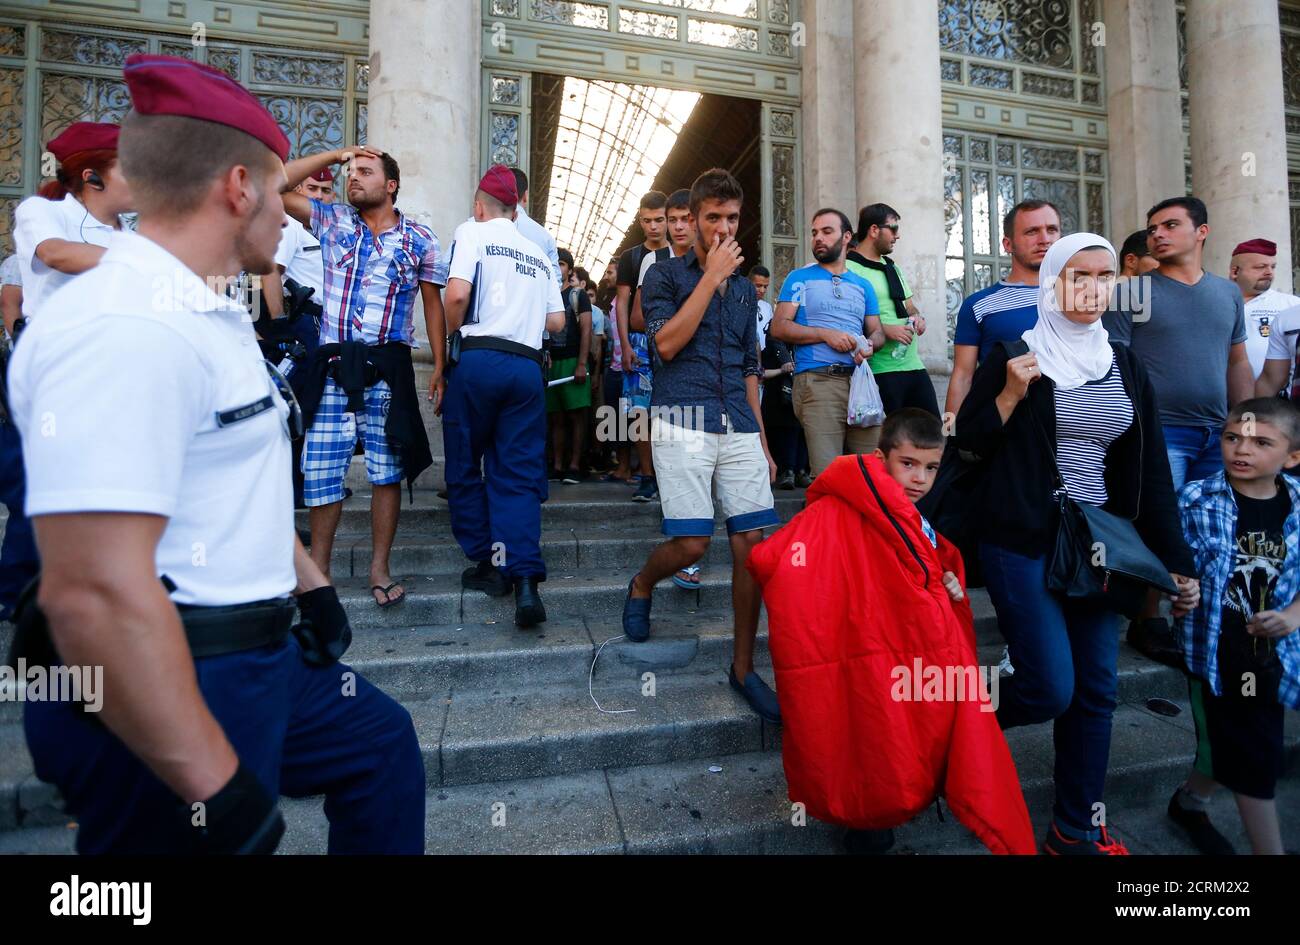 Migrants leave the main Eastern Railway station in Budapest, Hungary, September 1, 2015. Hungary closed Budapest's main Eastern Railway station on Tuesday morning with no trains departing or arriving until further notice, a spokesman for state railway company MAV said. There are hundreds of migrants waiting at the station. People have been told to leave the station and police have lined up at the main entrance, national news agency MTI reported. REUTERS/Laszlo Balogh Stock Photo